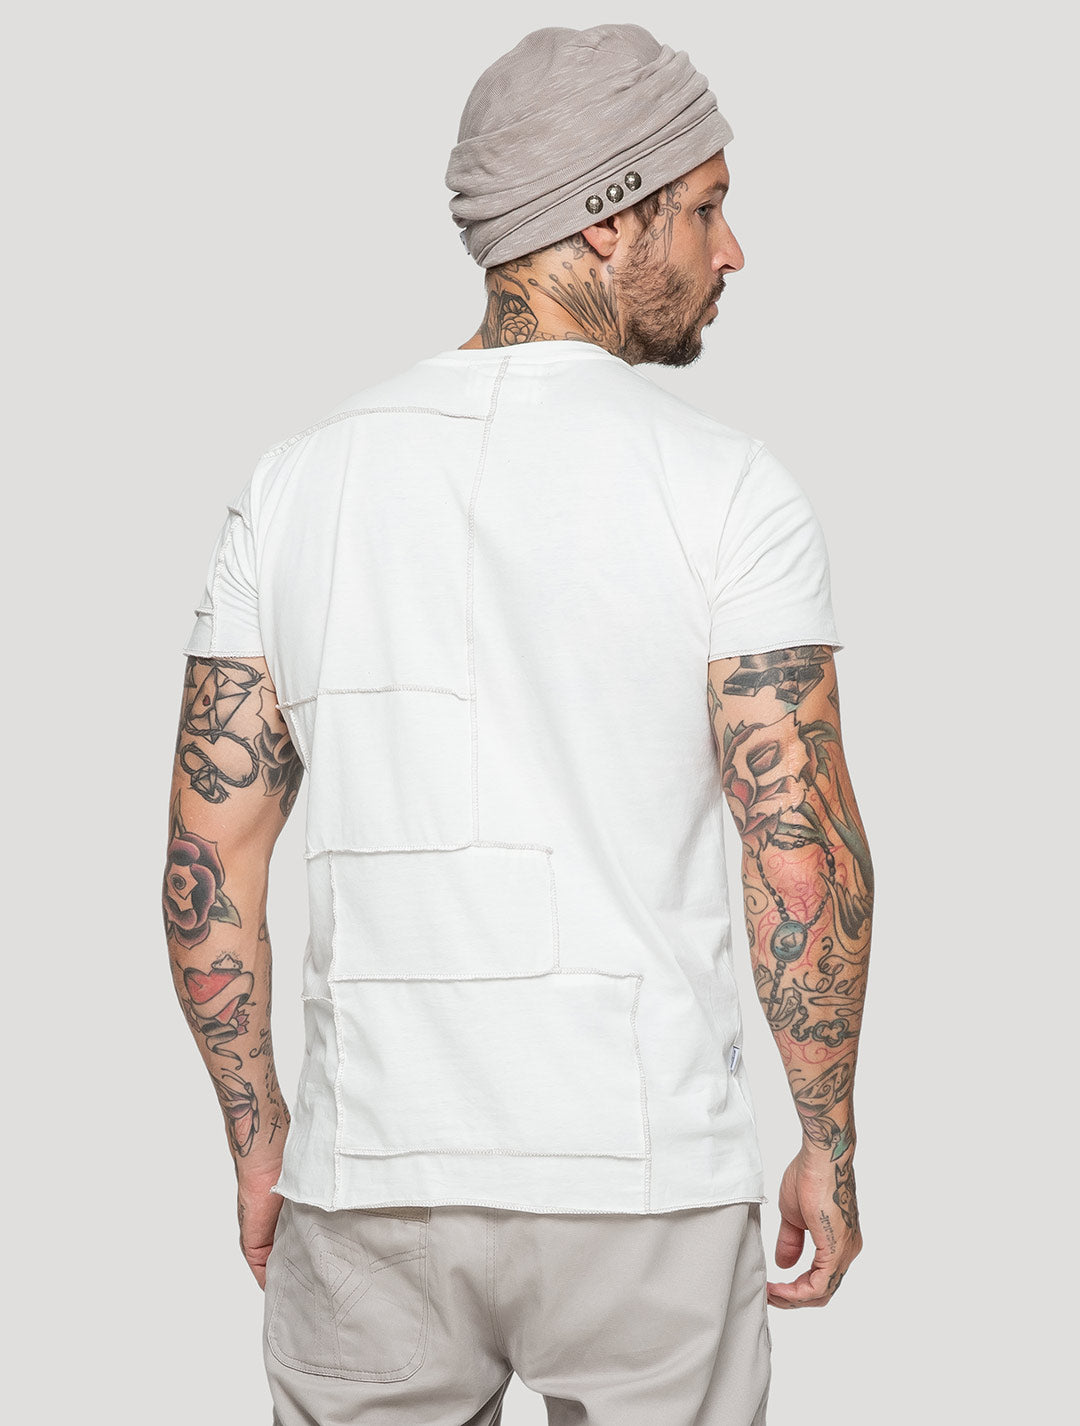 Off White Patchwork Short Sleeves Tee by Psylo Fashion